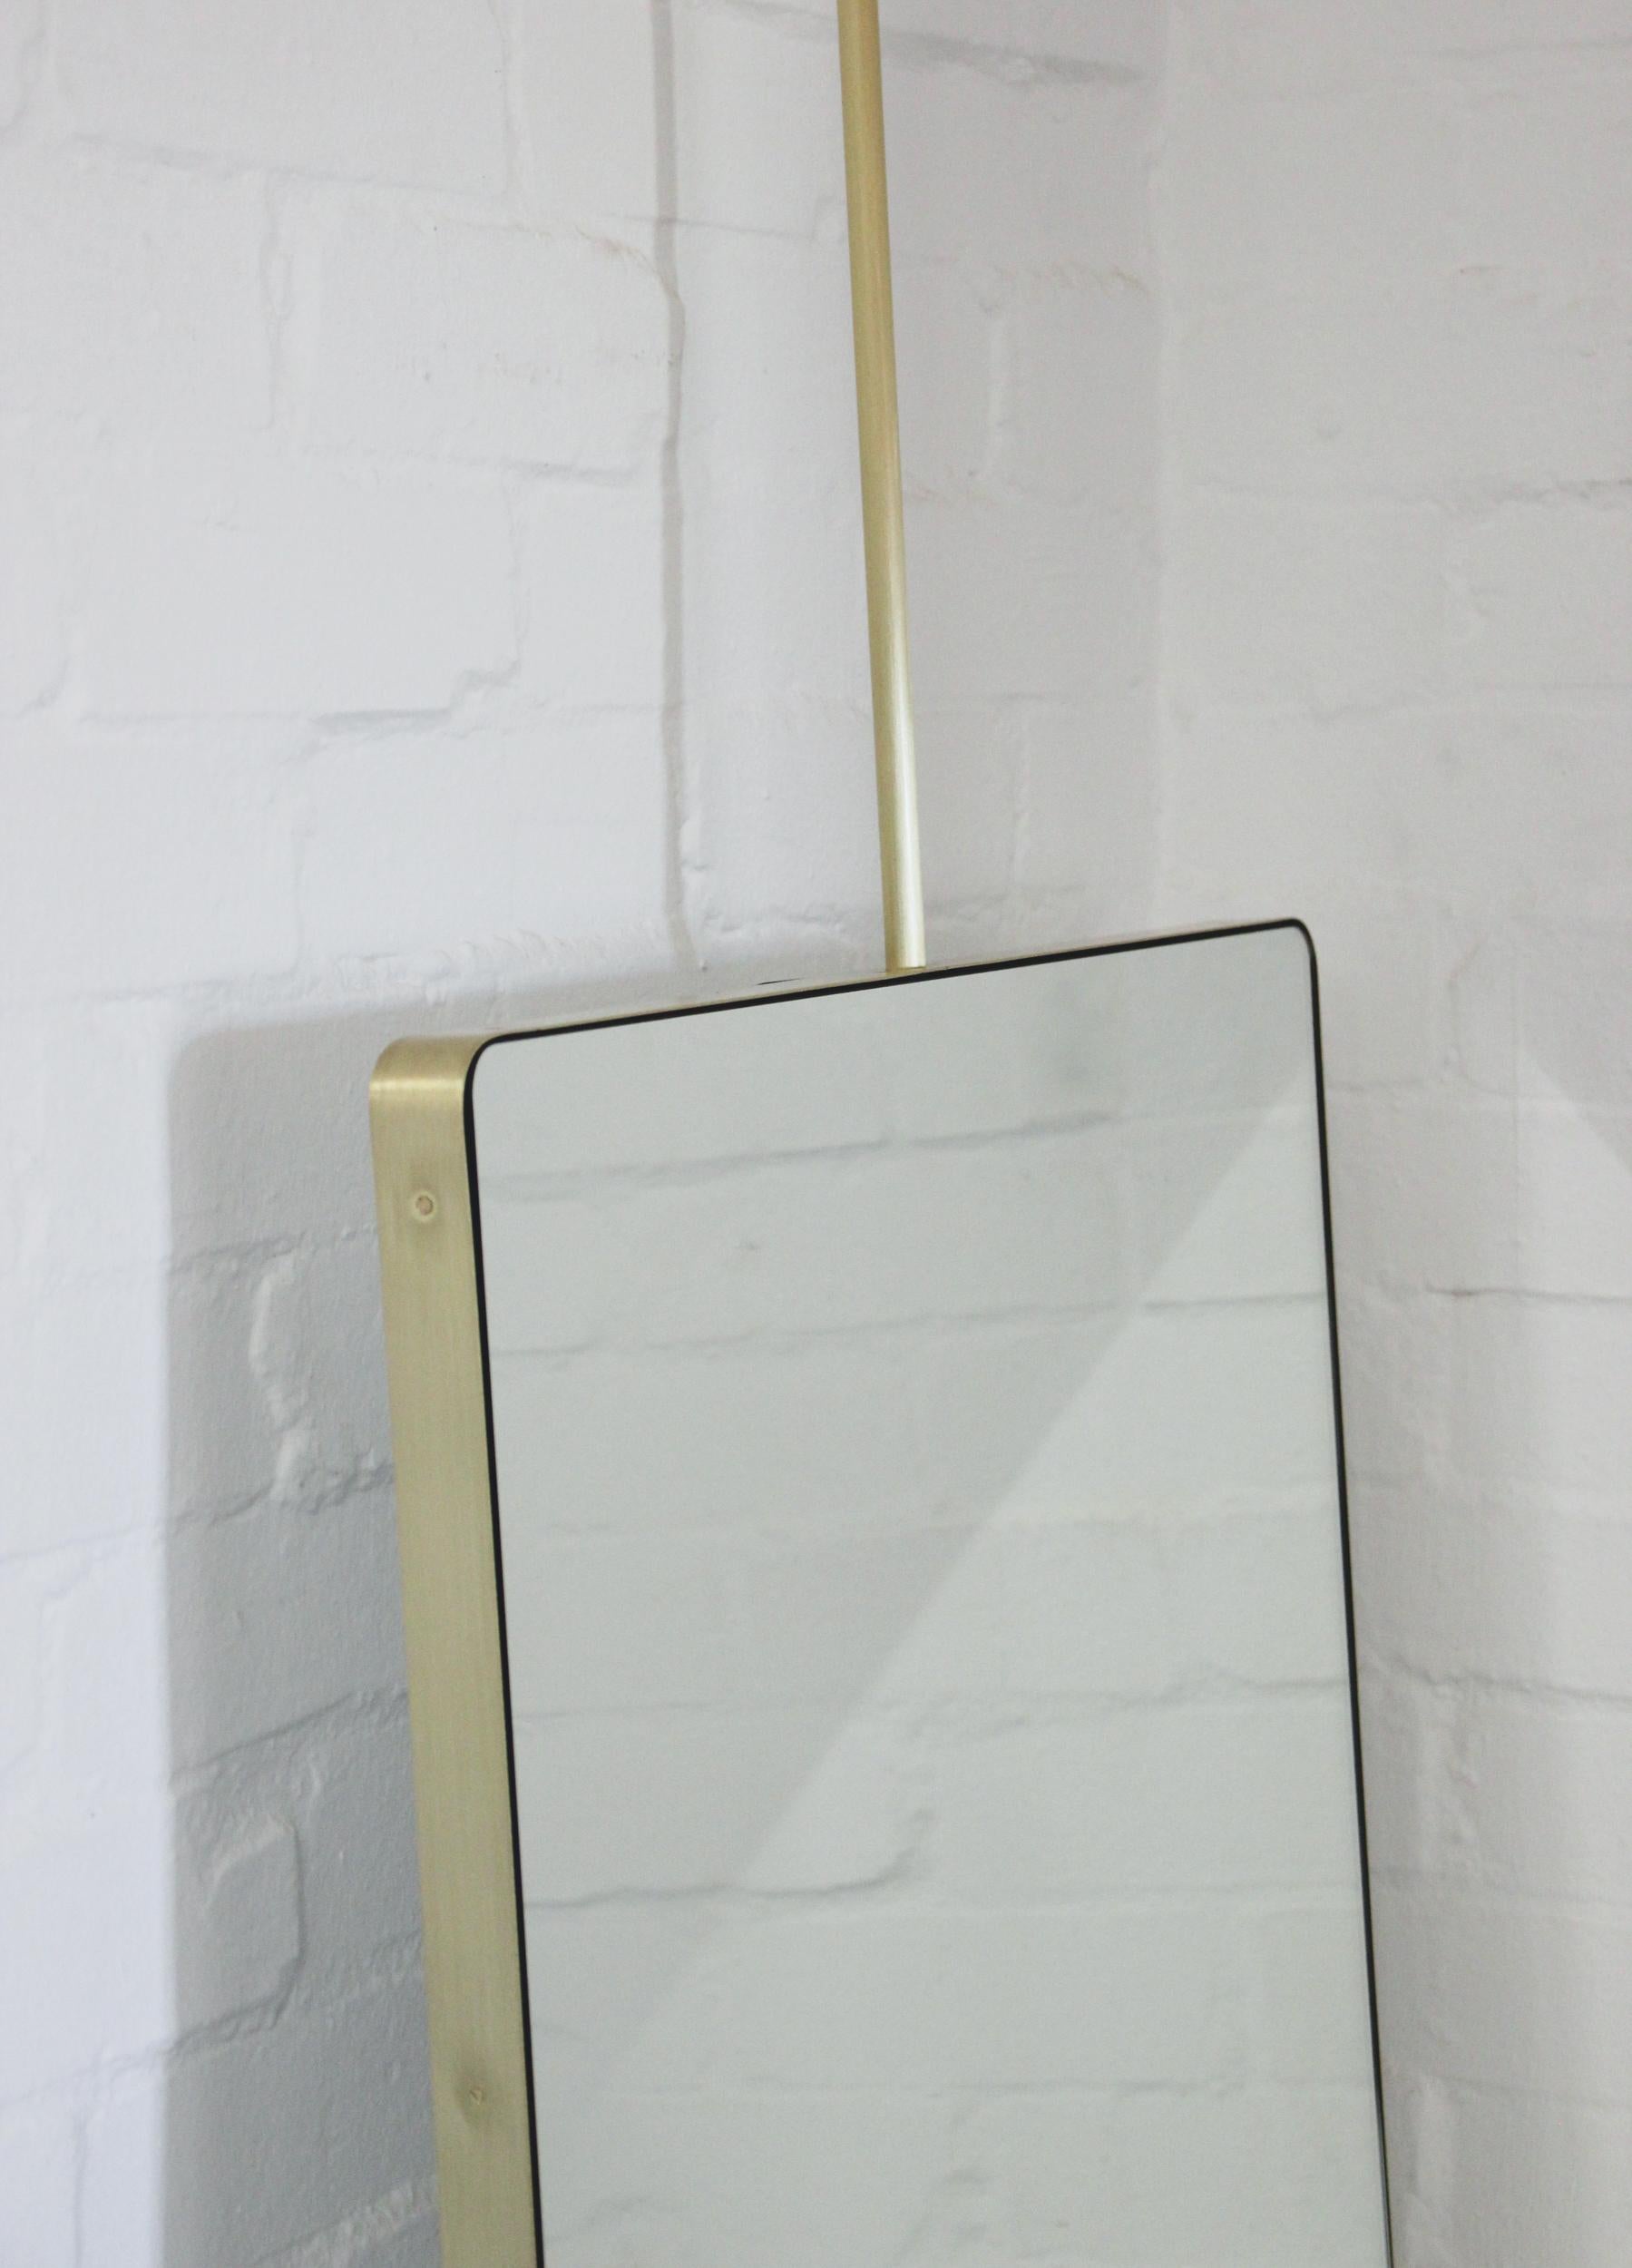 The images in this personal entry illustrate a standard sized of the suspended Quadris™ mirror with a brushed brass frame. Should an order be placed, a presentation detailing all specifications will be created to obtain final approval prior to